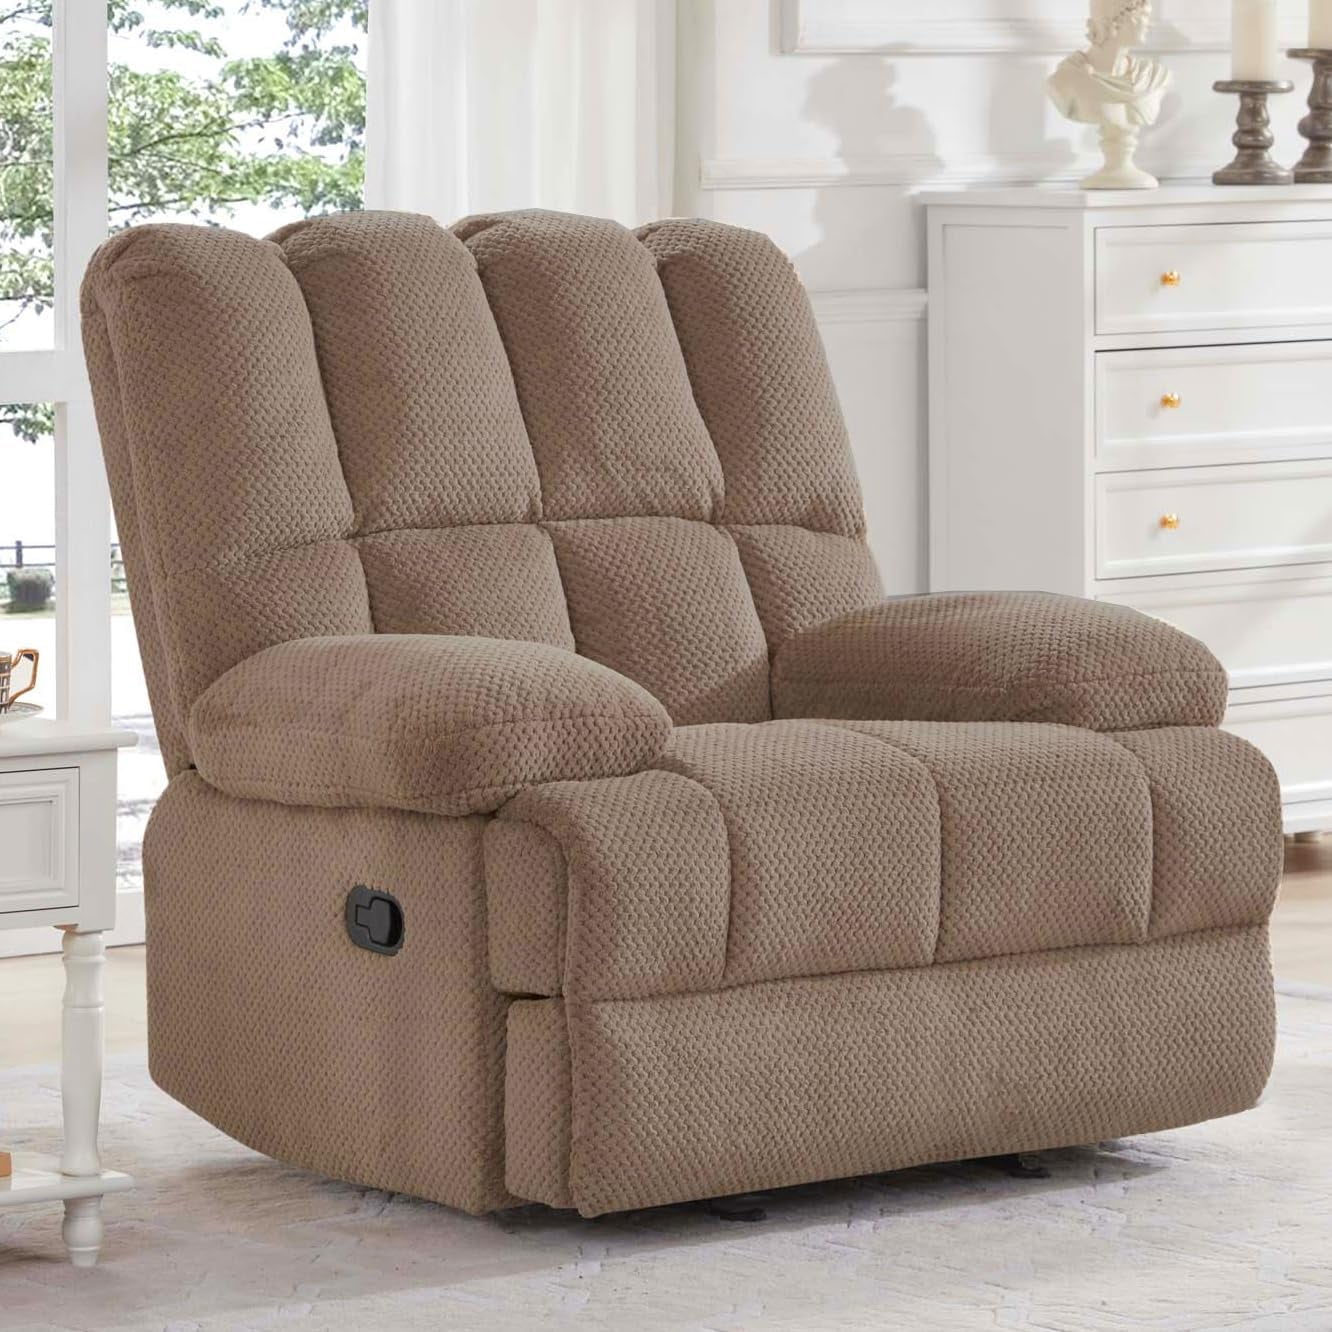 Lane Stallion (POWER RECLINE) Big Man (Extra Large) Comfort King Wallsaver  Recliner. Weight Capacity 500 lbs. Extended Length 79 Seat Width 25 Seat  Height 22 Free Curbside Delivery In Most Areas. (Western